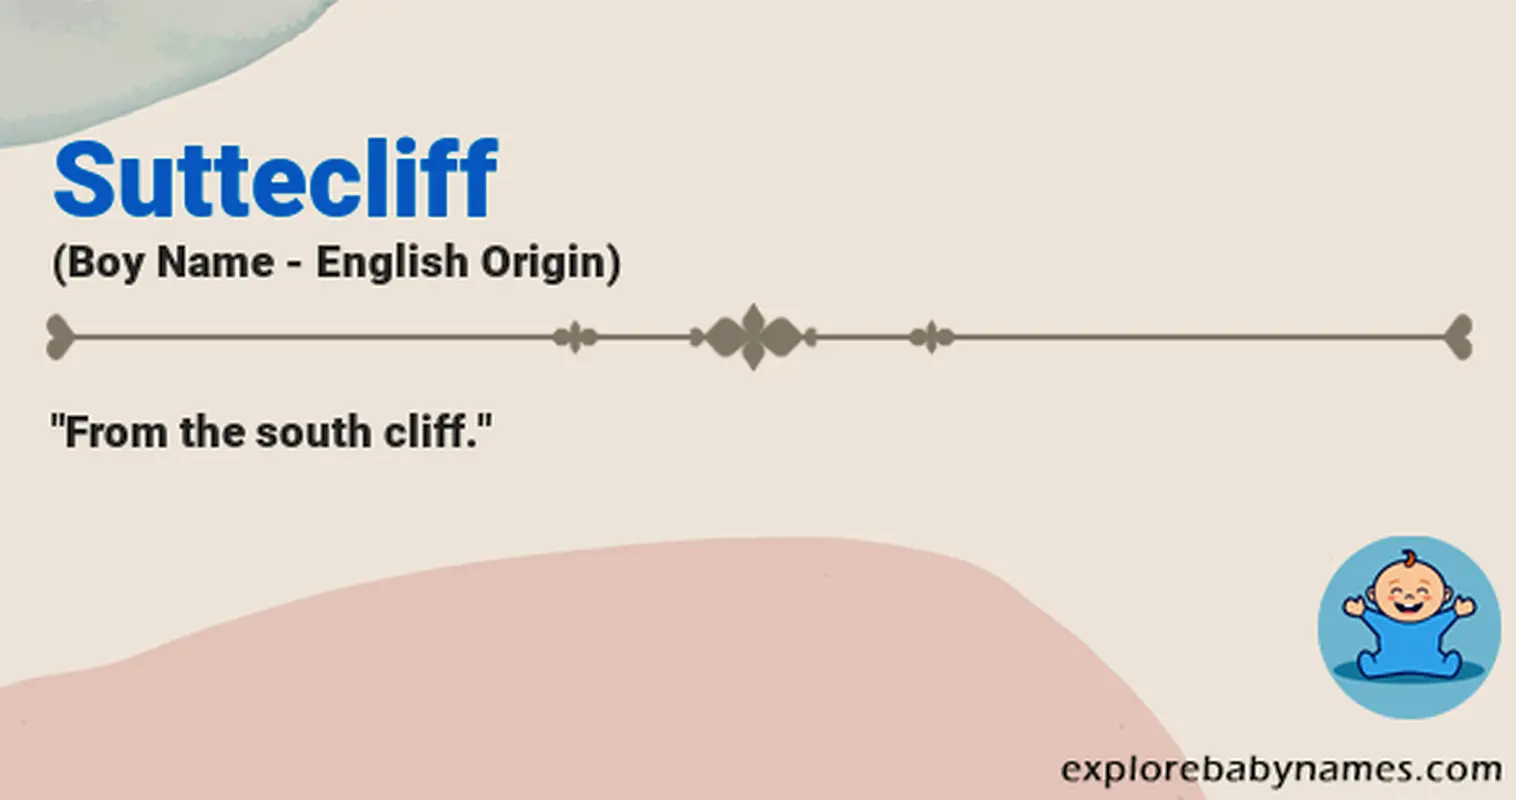 Meaning of Suttecliff